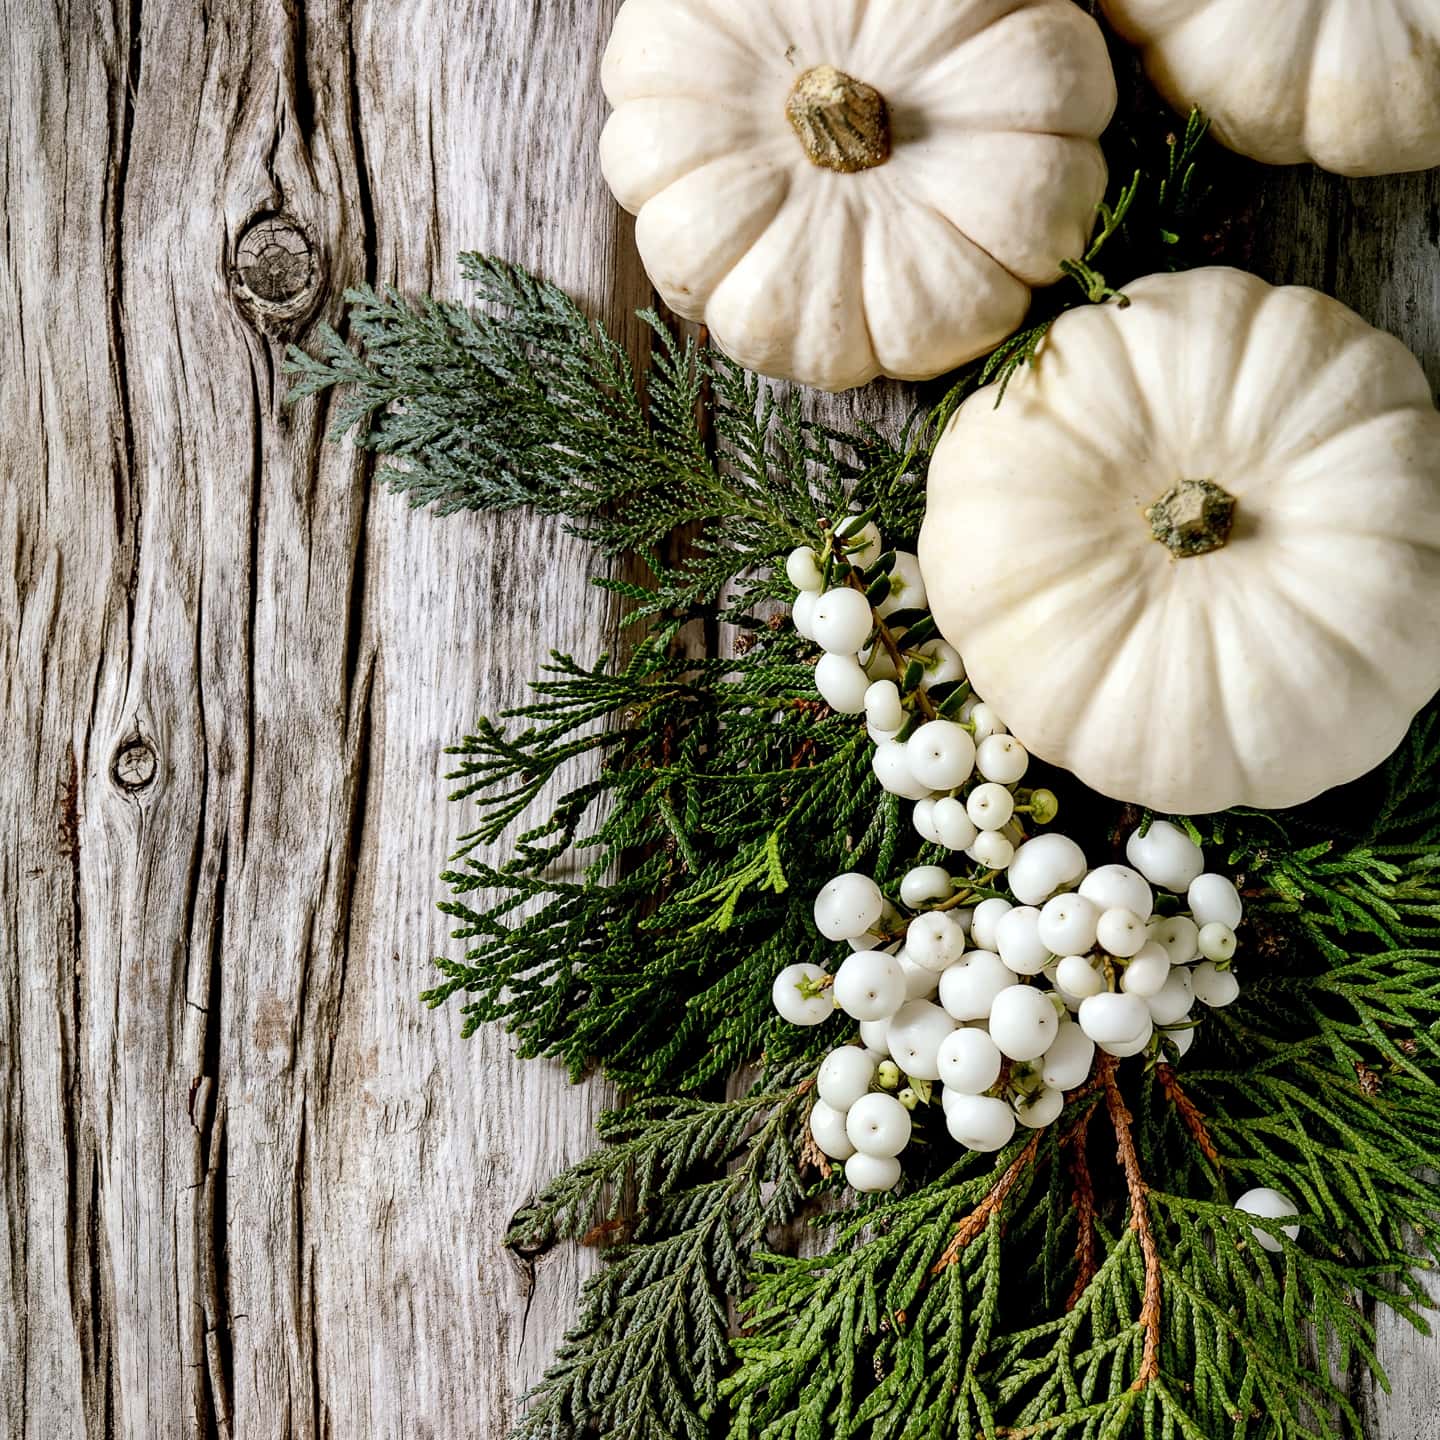 Fall home decor ideas featuring white pumpkins and berries on a wooden background.